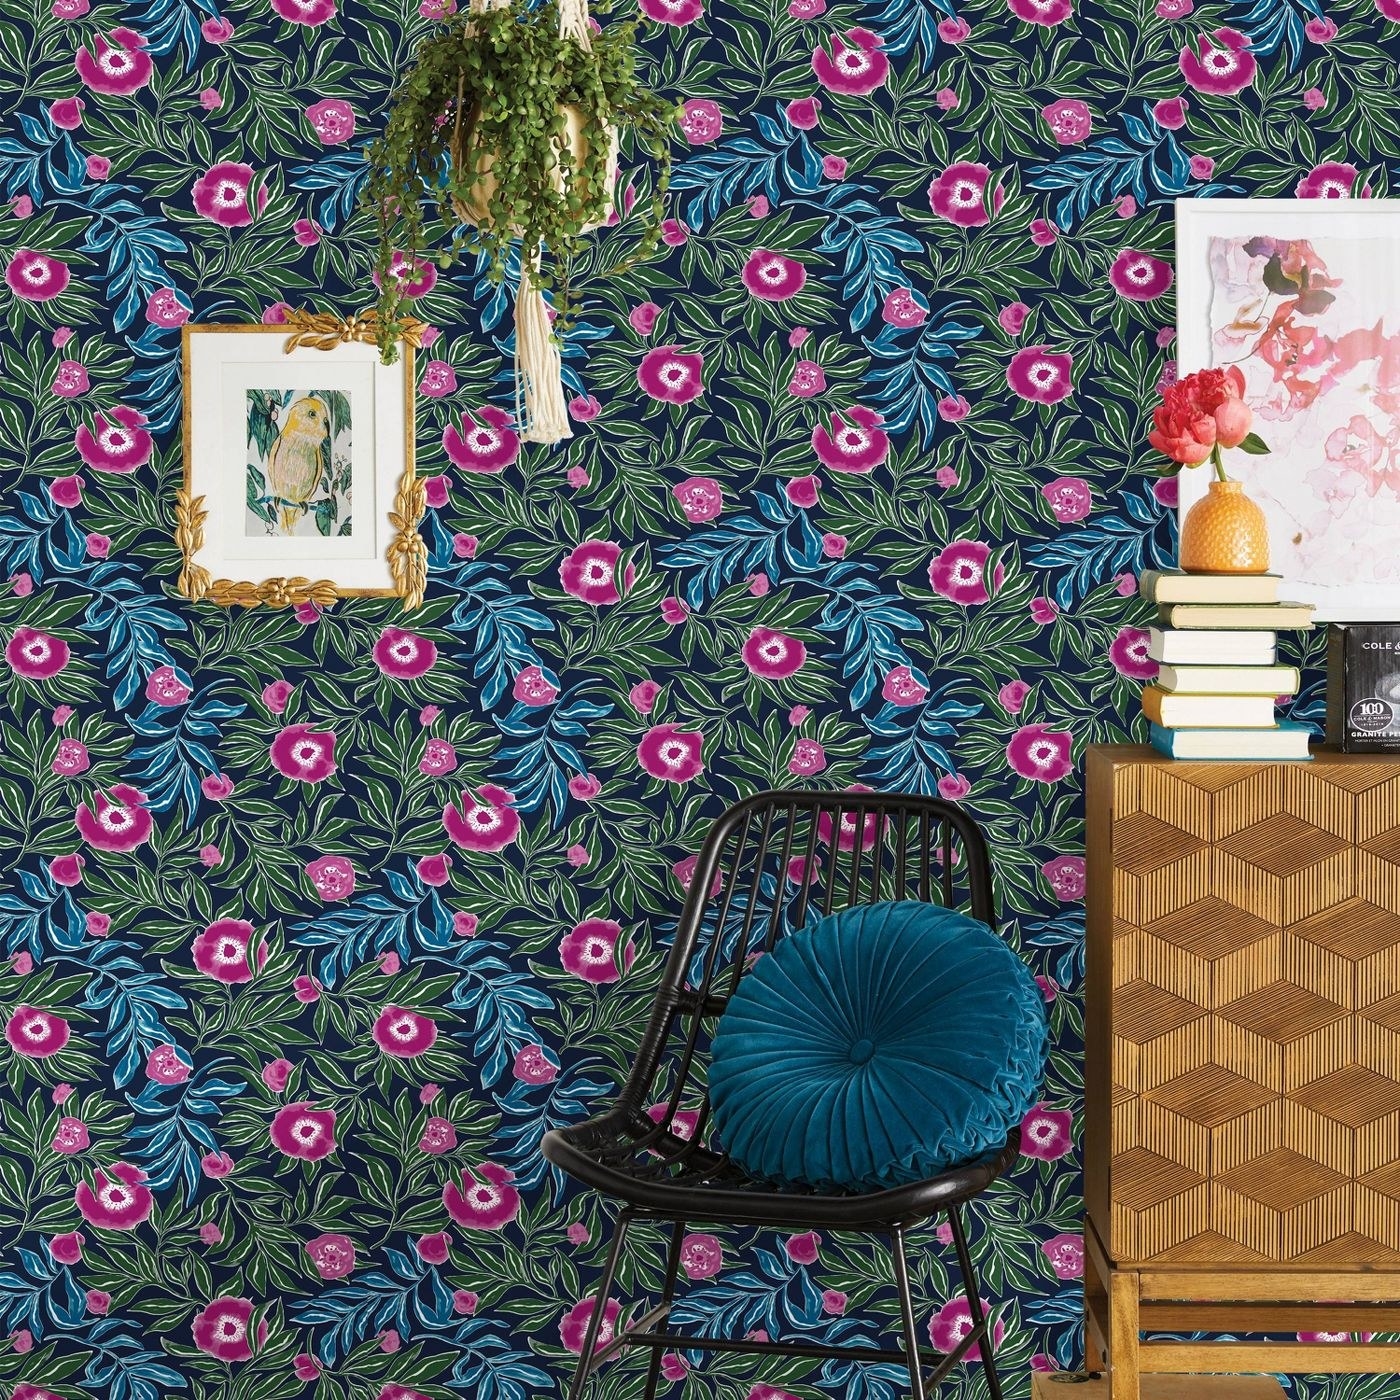 The dark blue, green, and magenta floral wallpaper on a wall